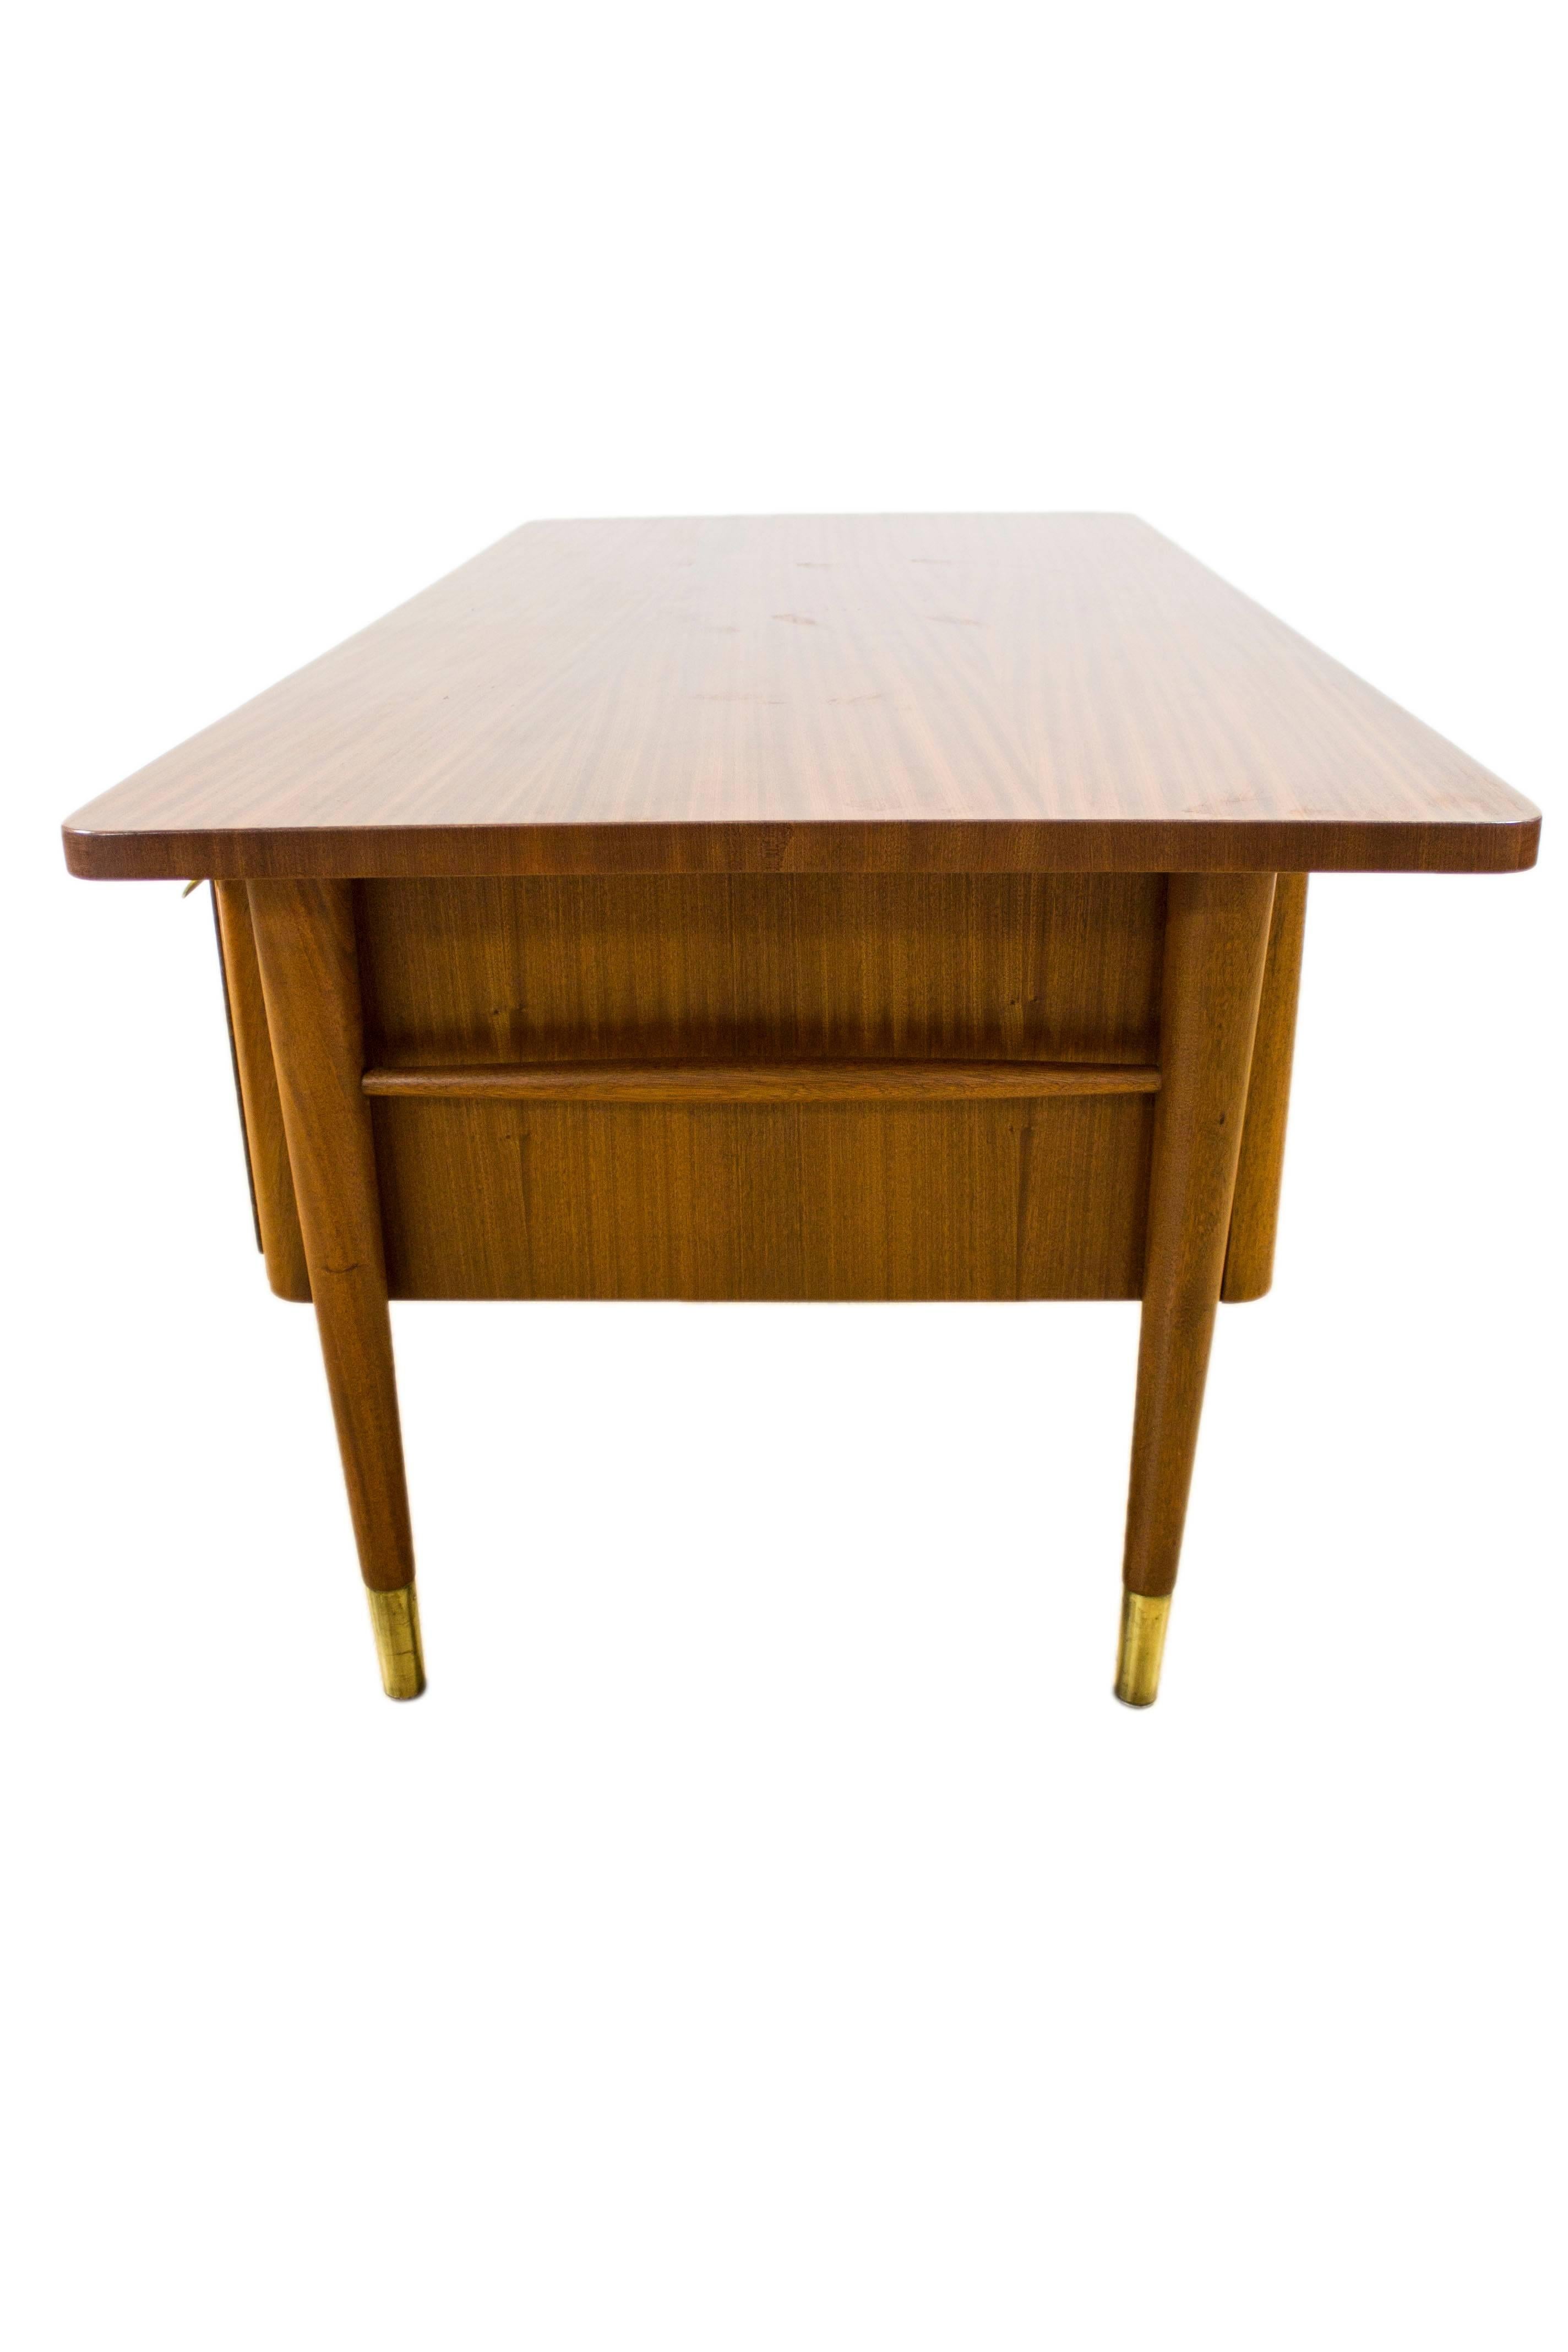 20th Century Abbess Rosewood and Brass Executive Desk Lockable G Plan Eames Era For Sale